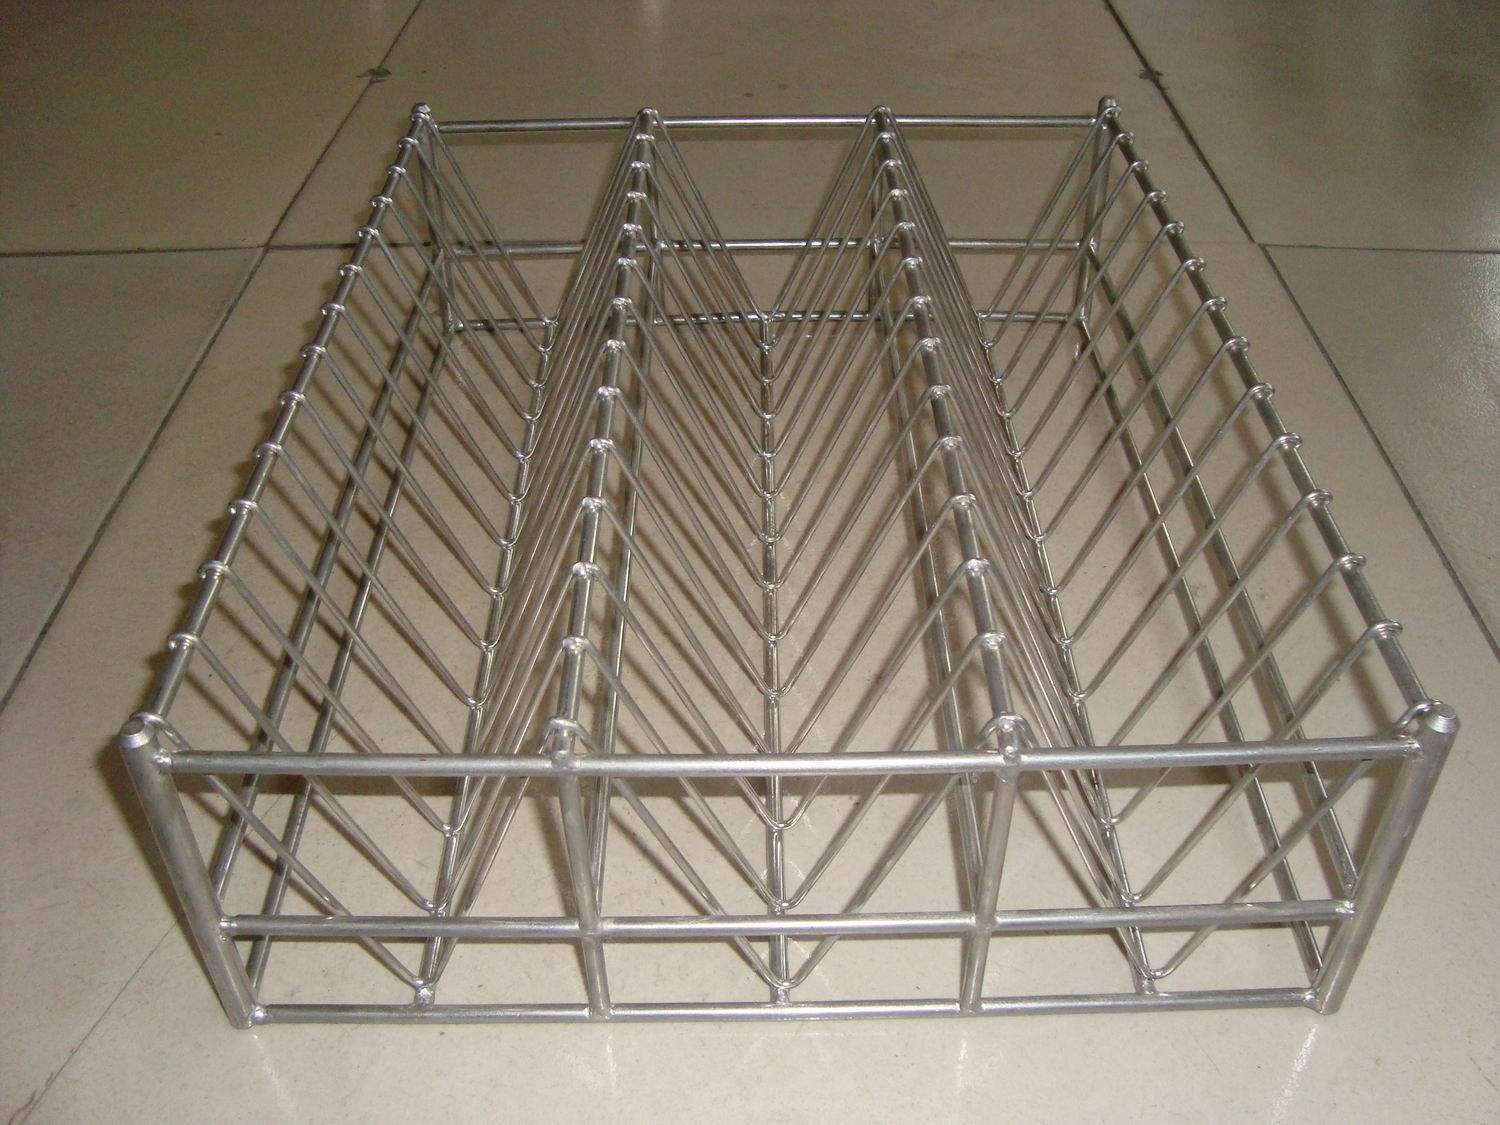 Stainless Steel Wire Rod Shelves